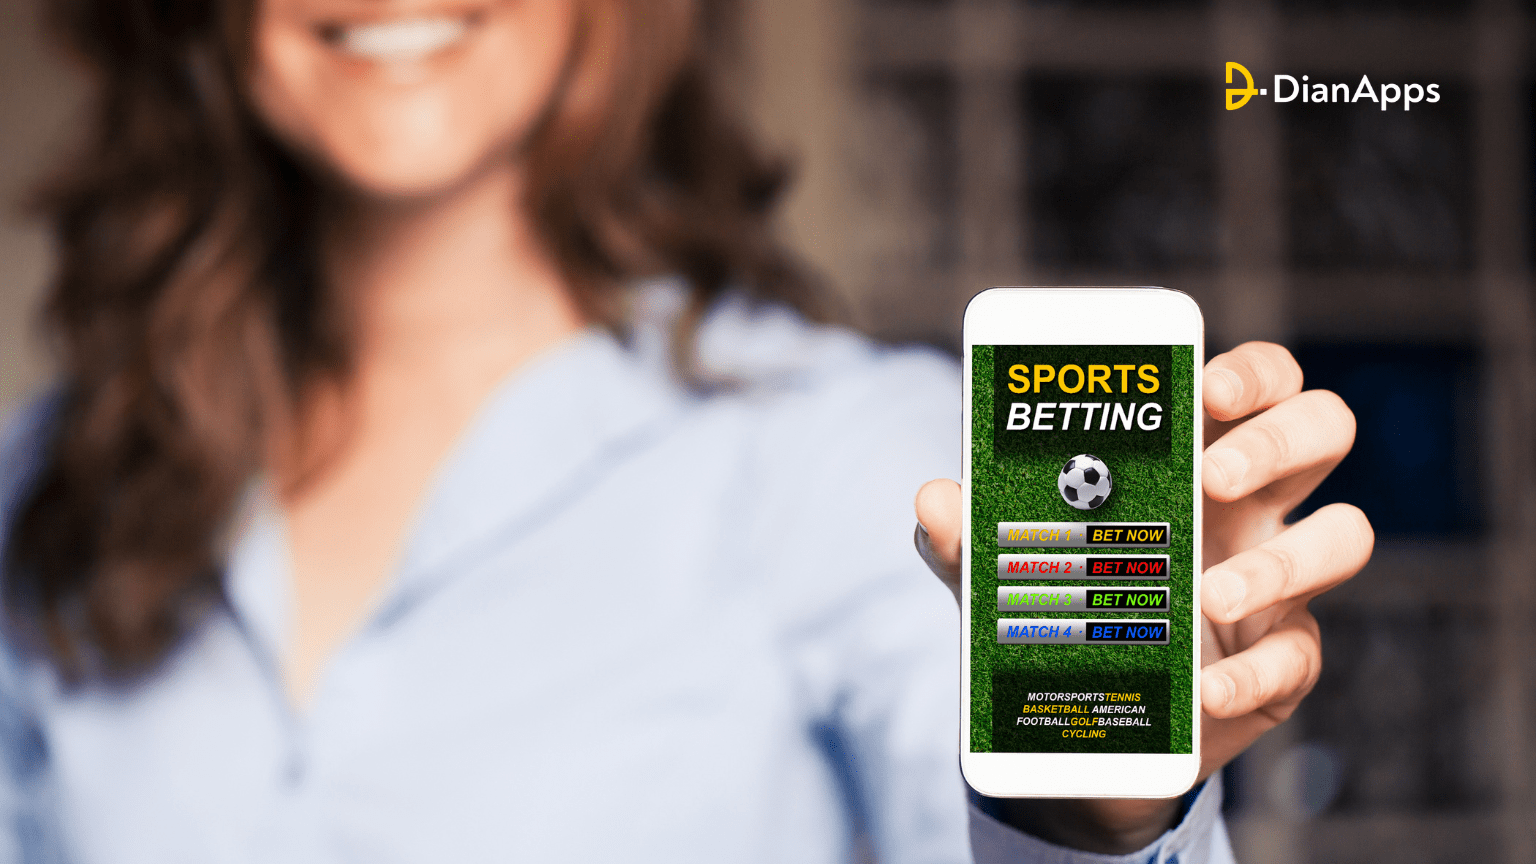 How to Build a Sports Betting App